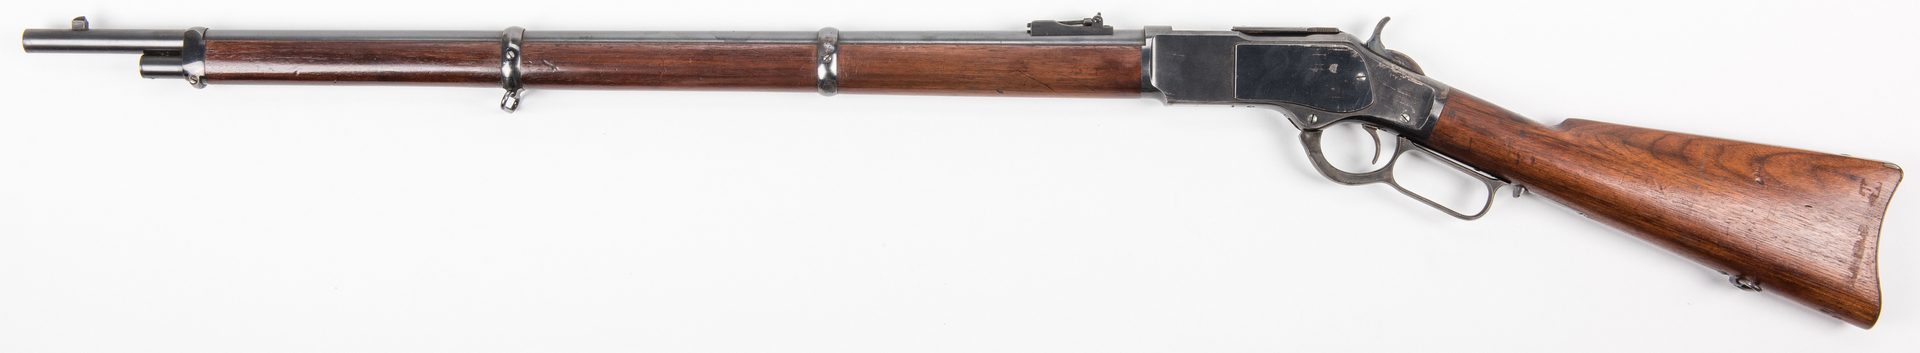 Lot 825: Winchester Model 1873, 44-40 Lever Action Rifle